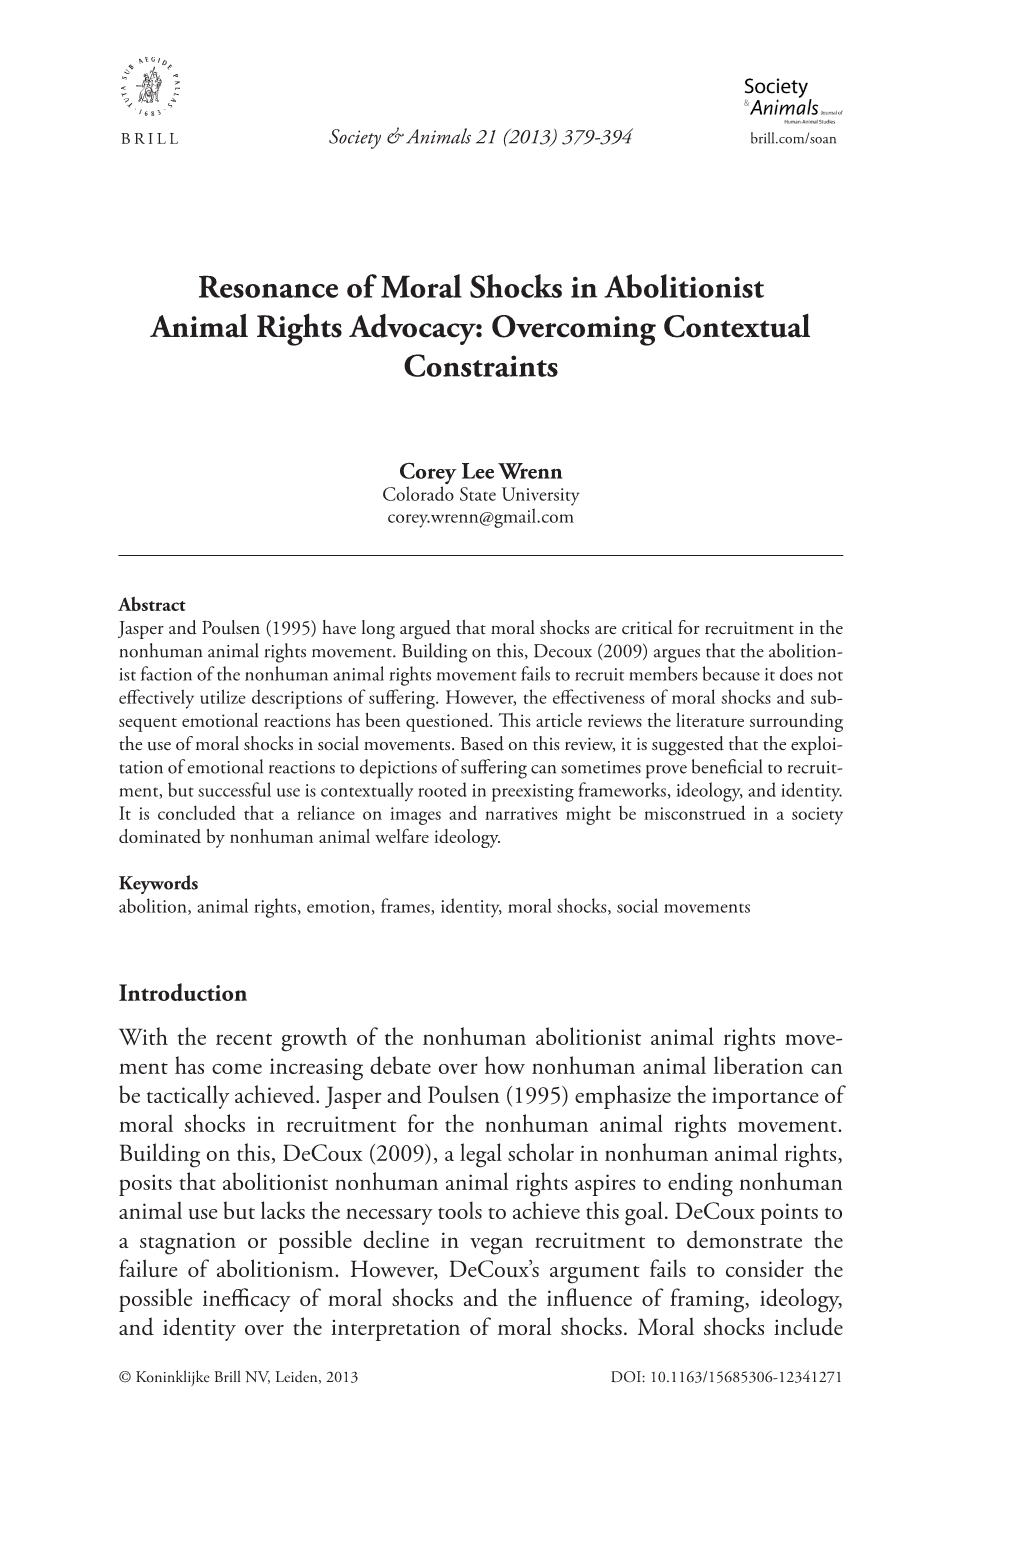 Resonance of Moral Shocks in Abolitionist Animal Rights Advocacy: Overcoming Contextual Constraints